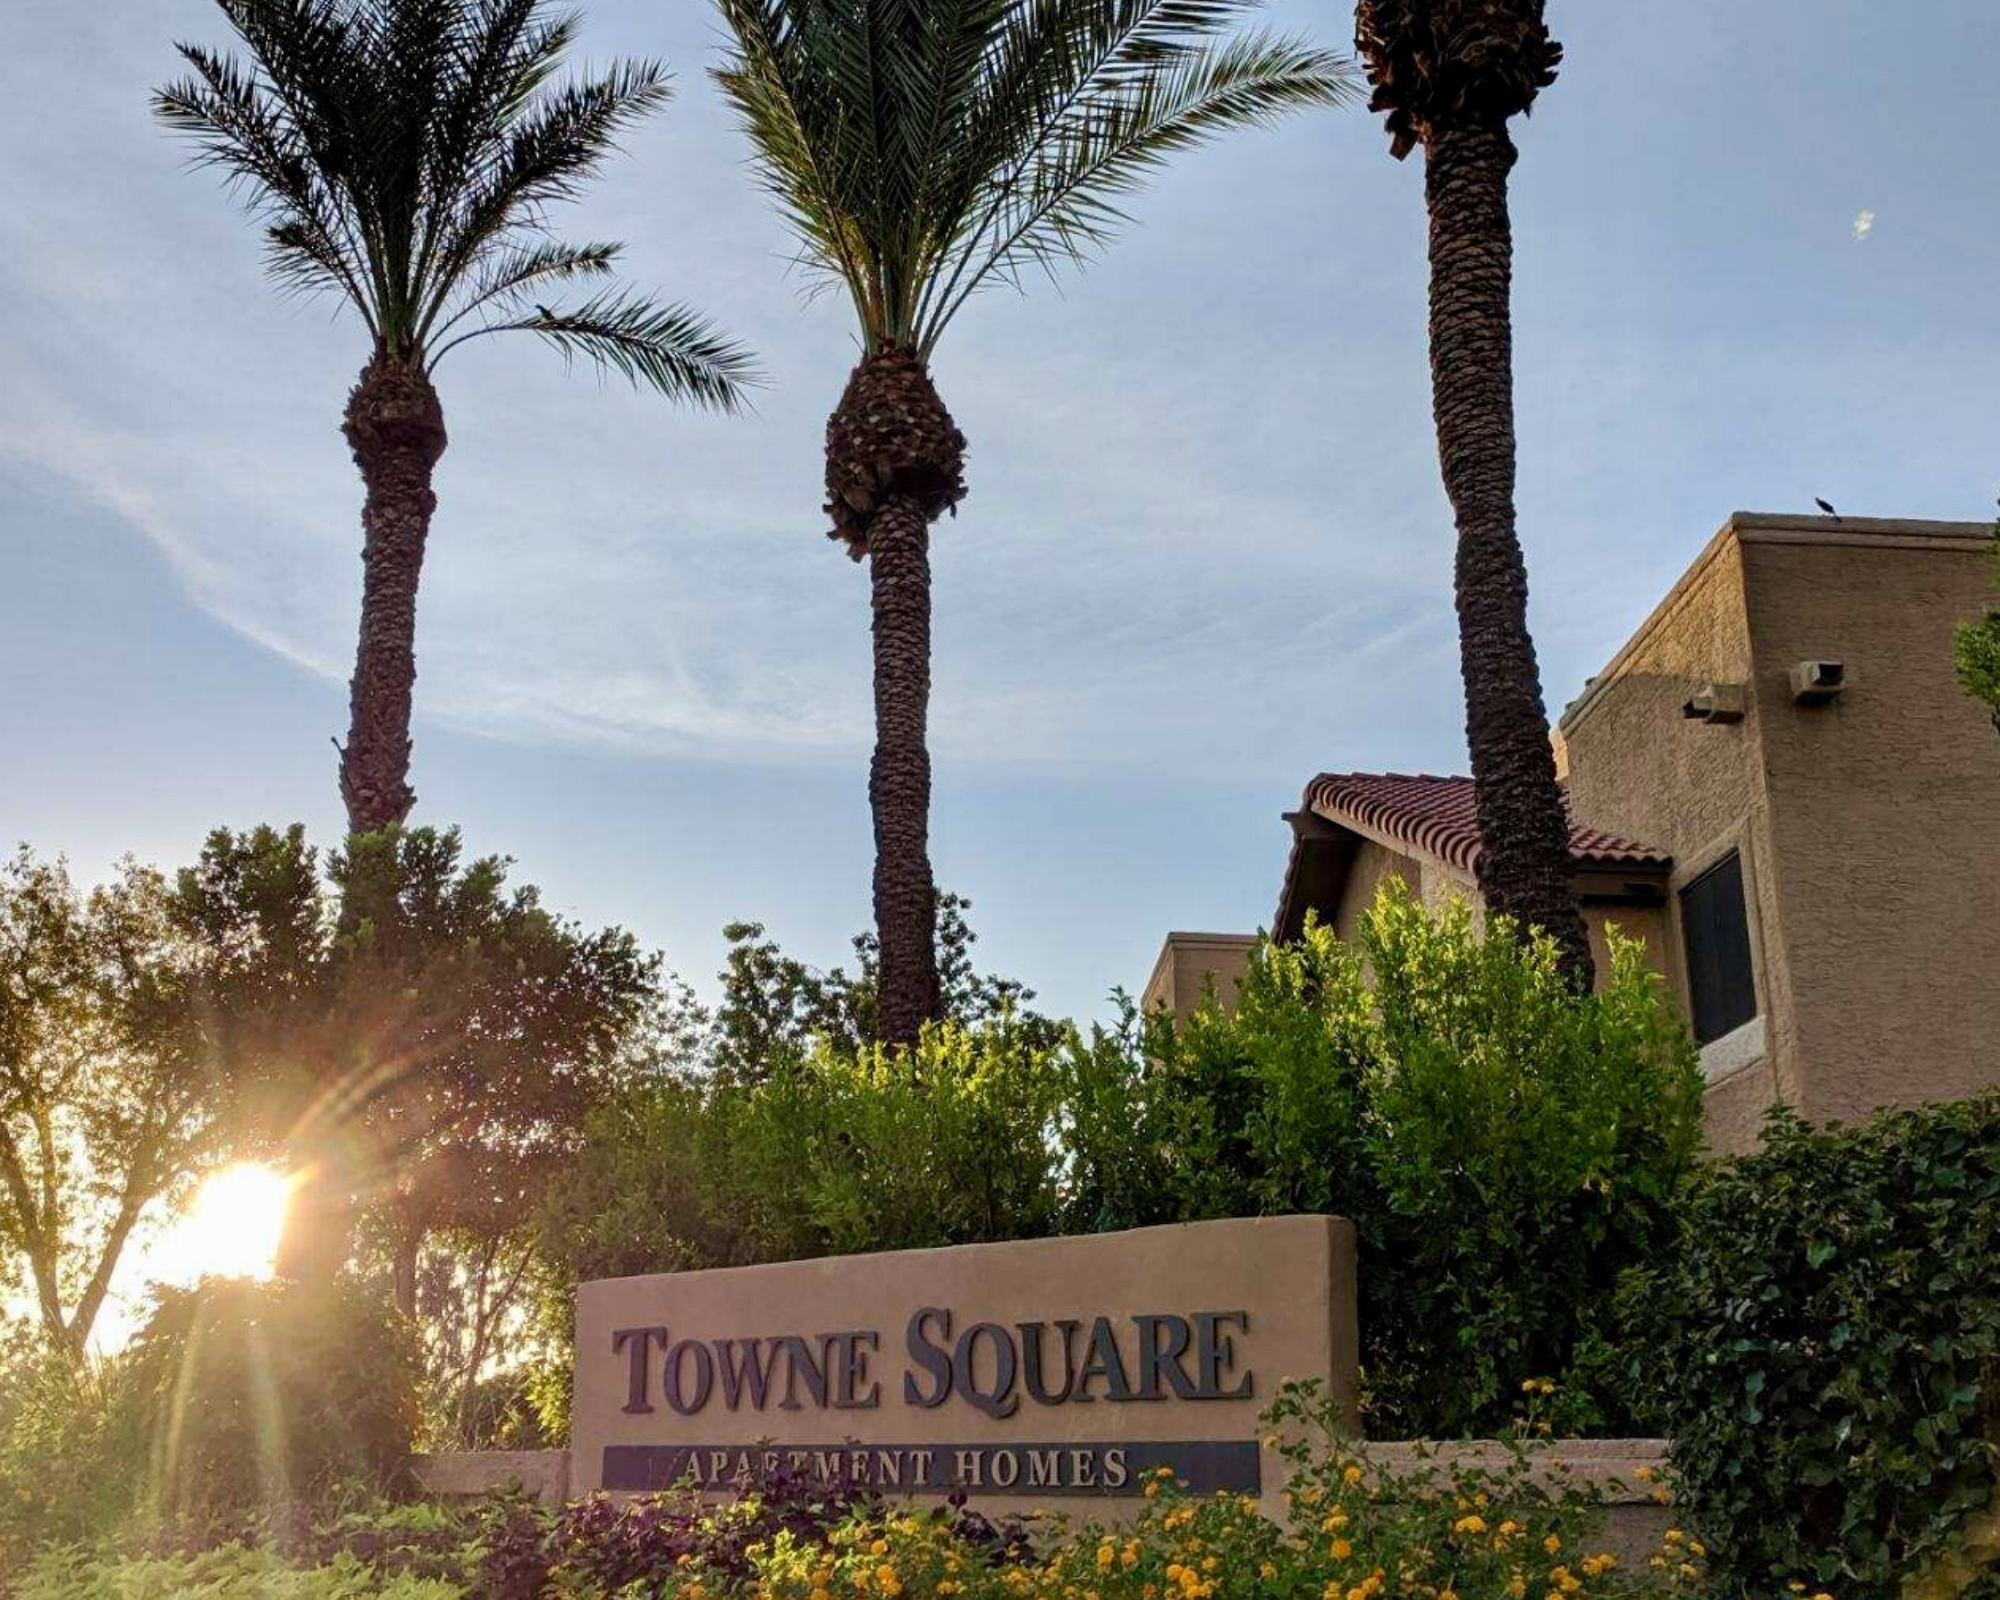 Towne Square Apartments in Chandler, AZ